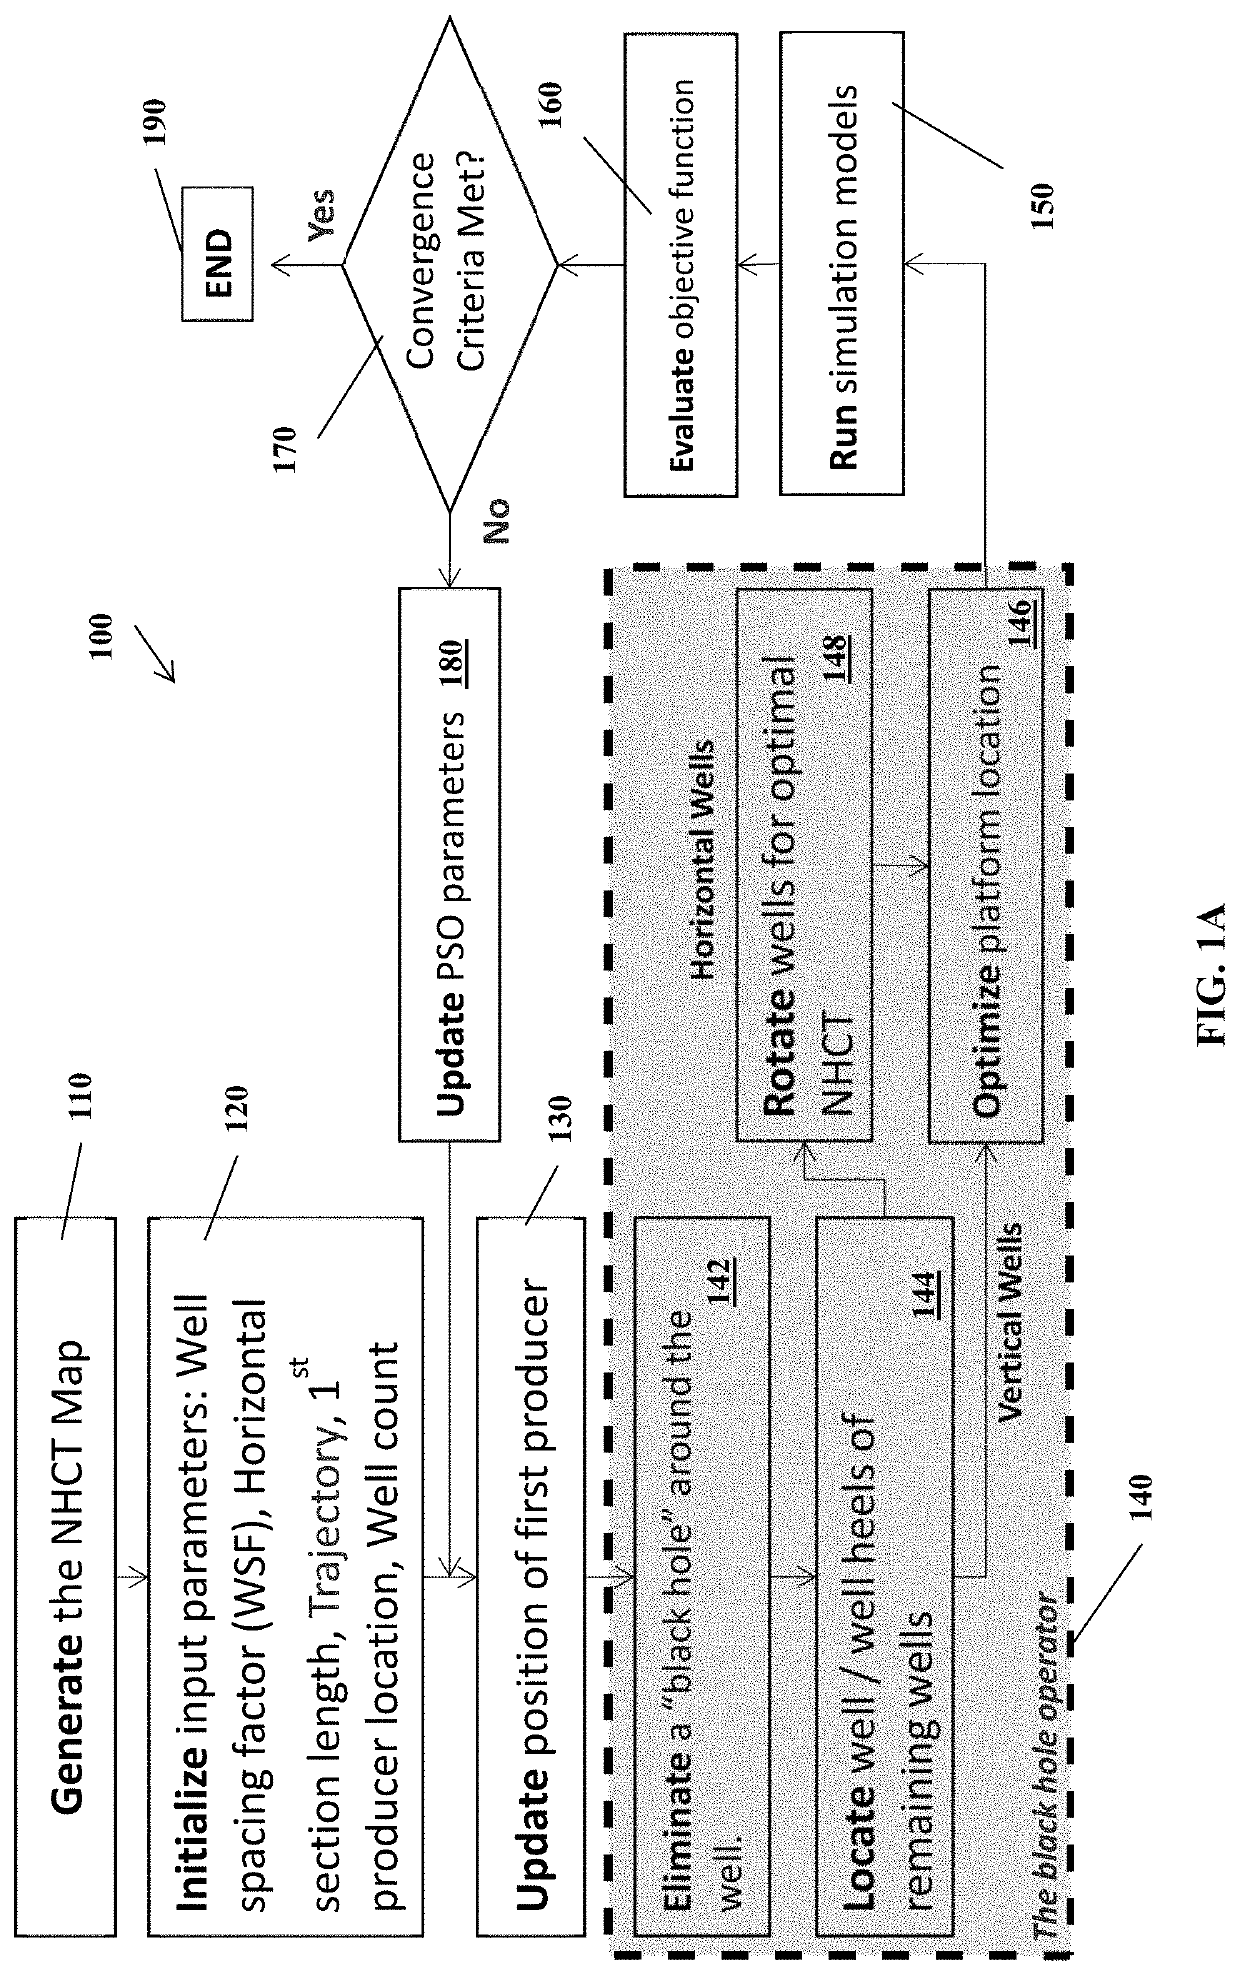 Black hole particle swarm optimization for optimal well placement in field development planning and methods of use